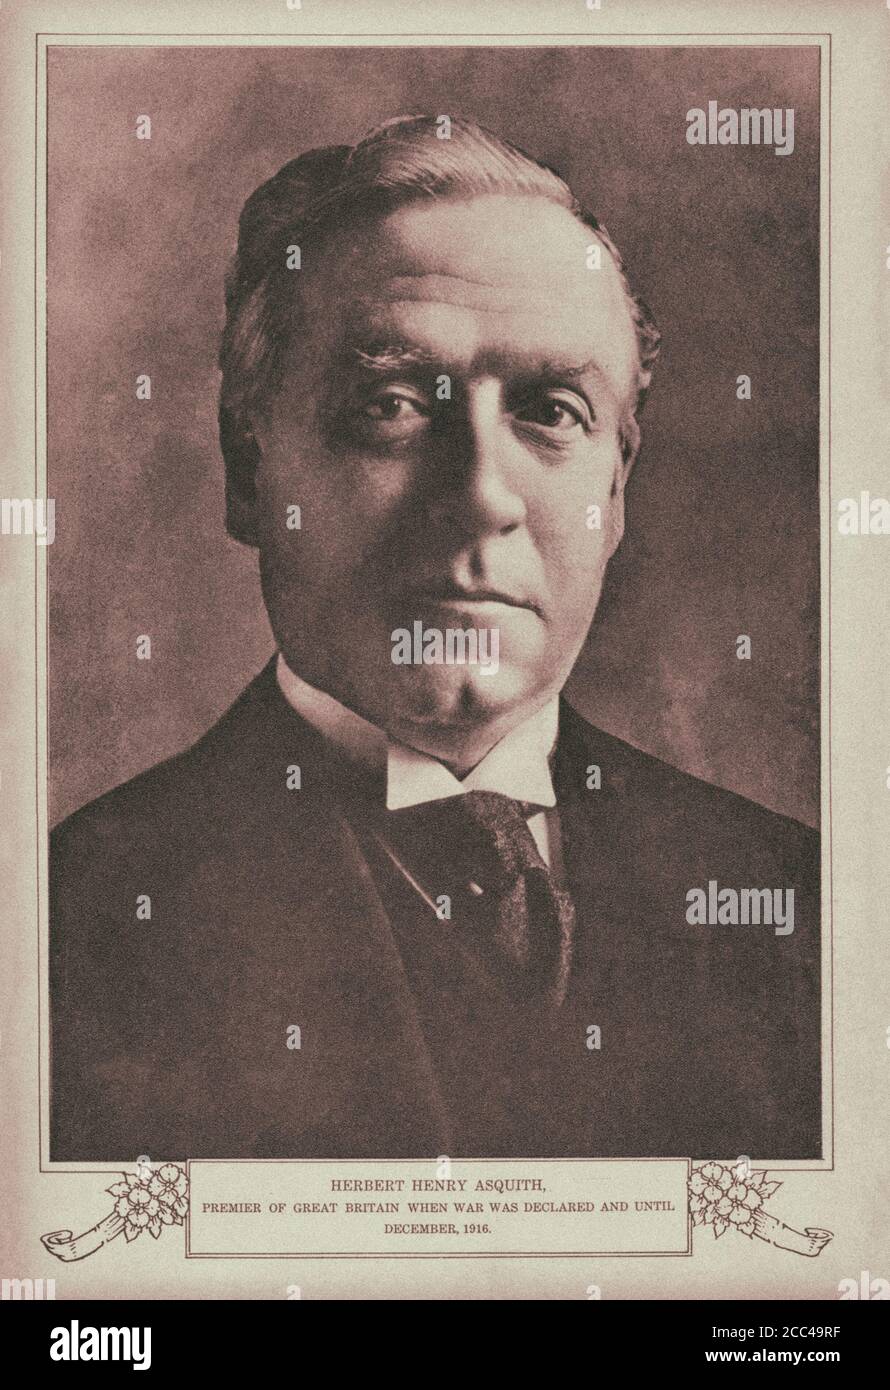 Herbert Henry Asquith, 1st Earl of Oxford and Asquith, (1852 – 1928), generally known as H. H. Asquith, was a British statesman and Liberal politician Stock Photo